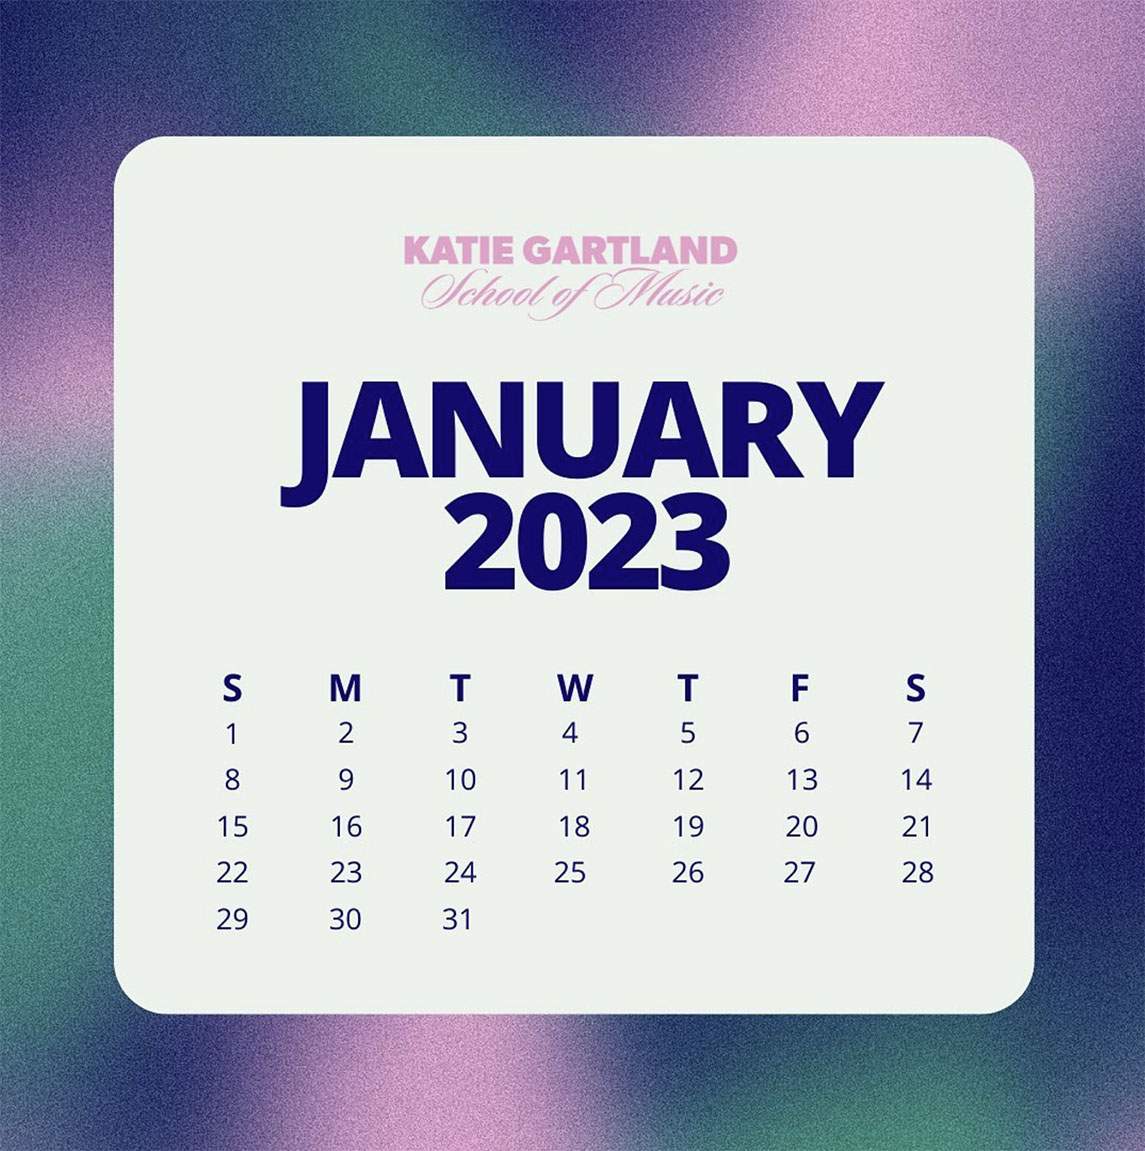 Our 2023 Term Dates